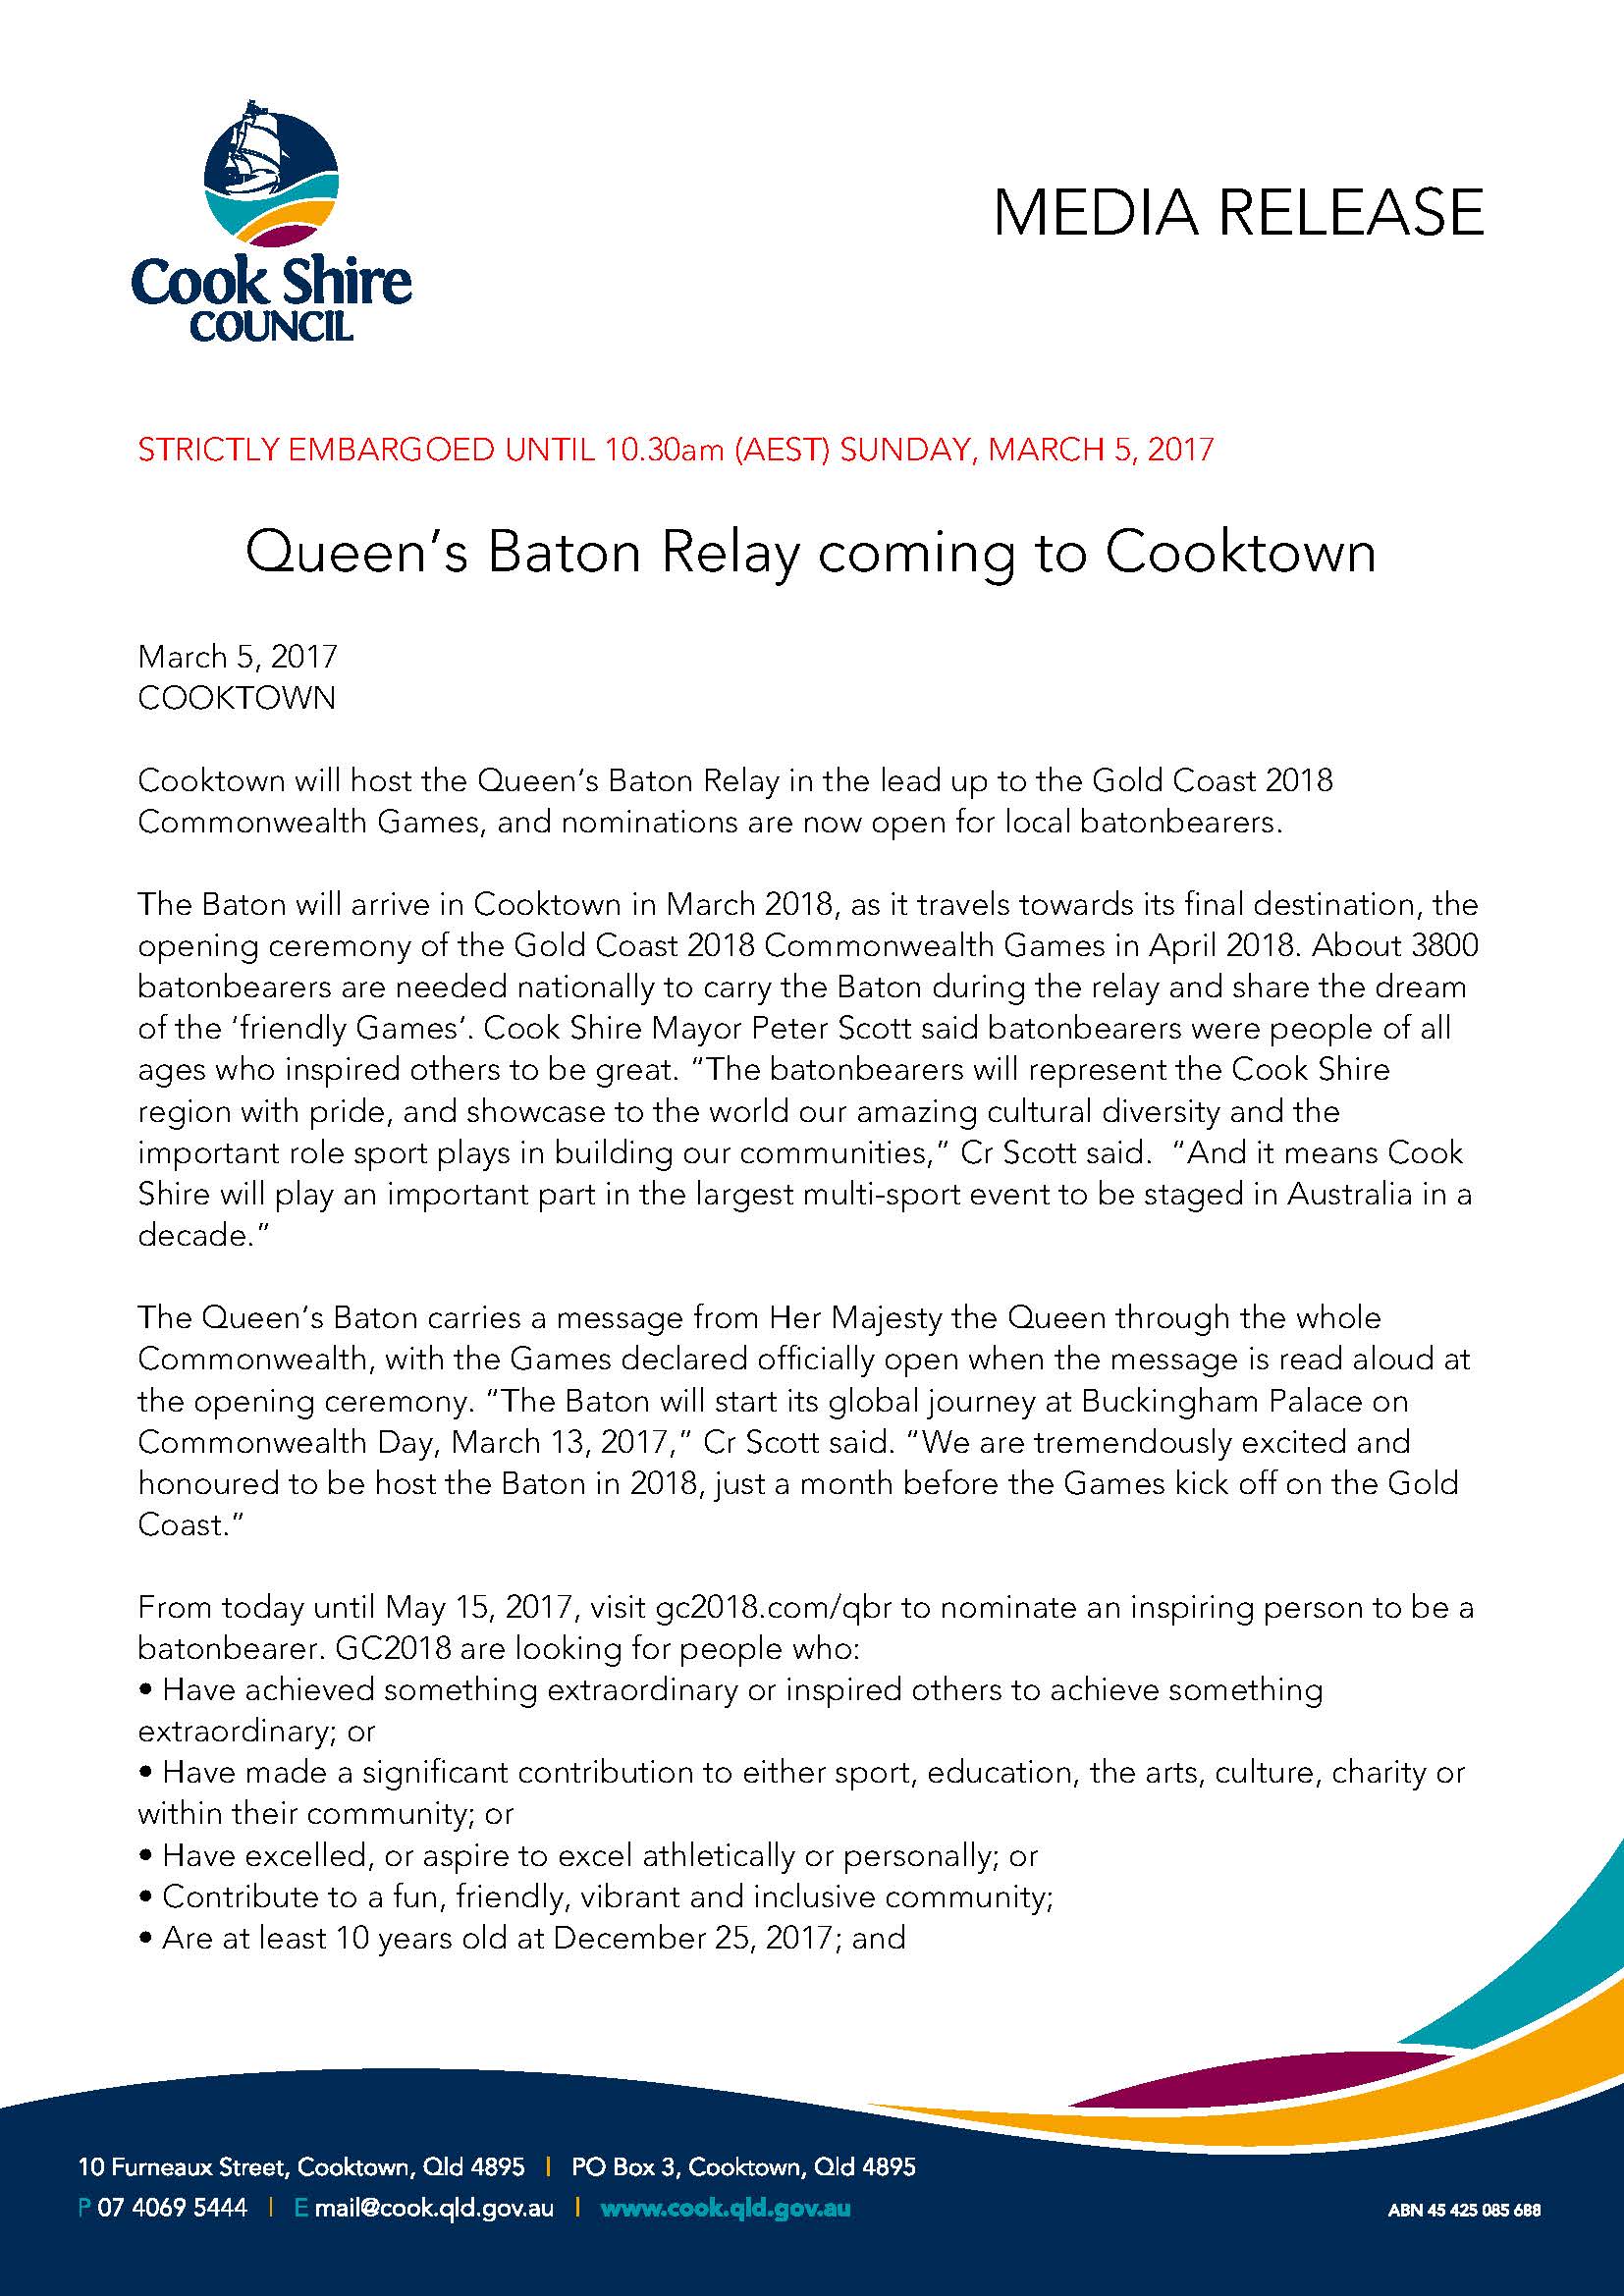 Queen's Baton Relay coming to Cooktown